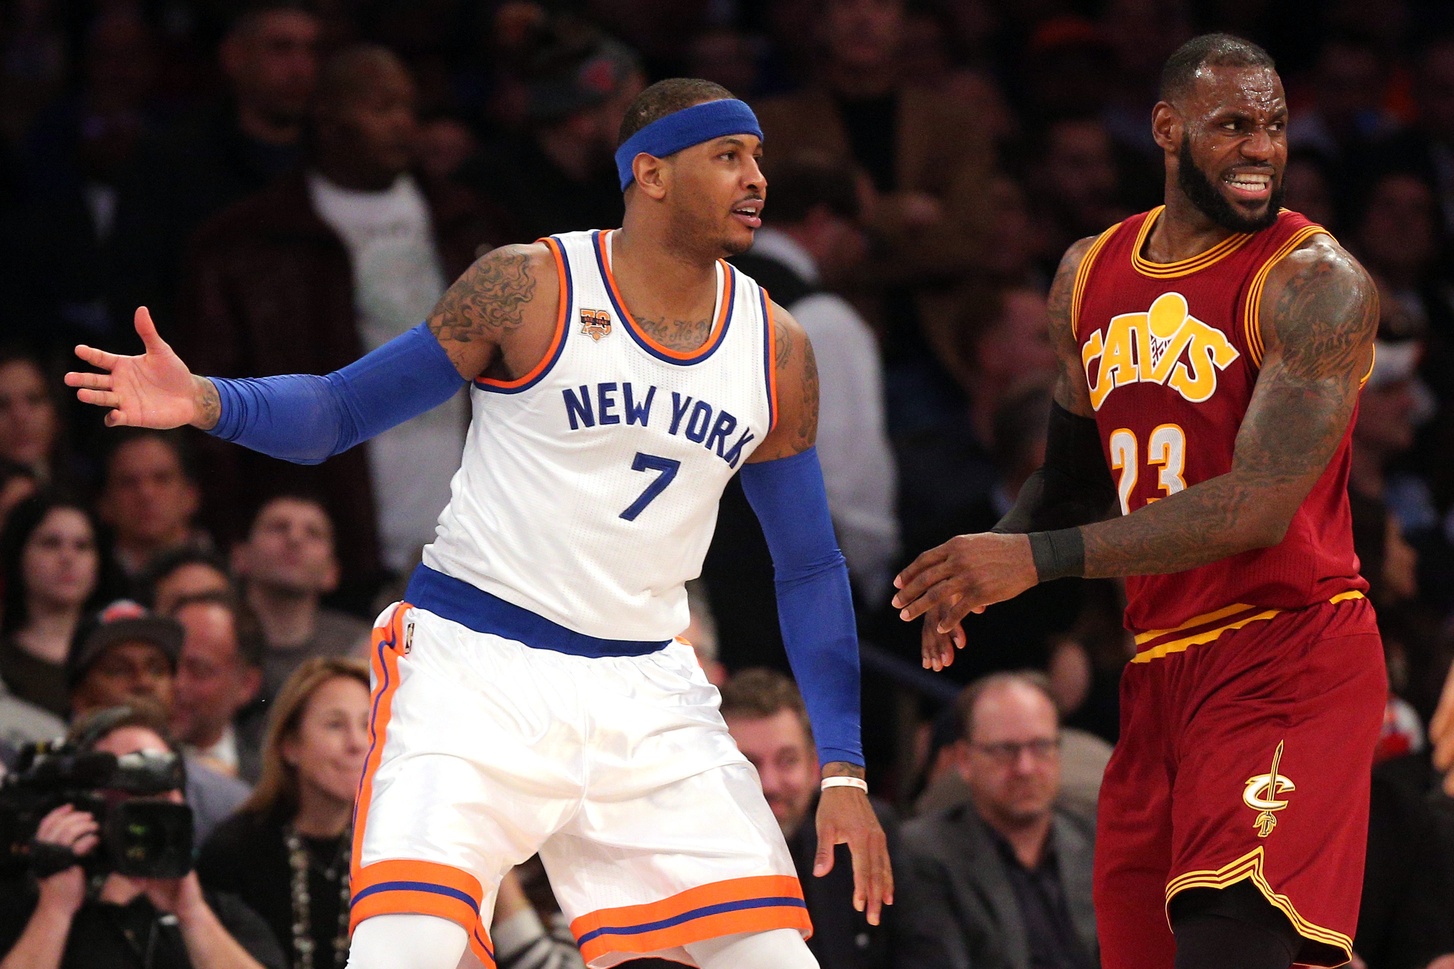 New York Knicks: Melo's focus on teammates and winning, not Phil's comments 